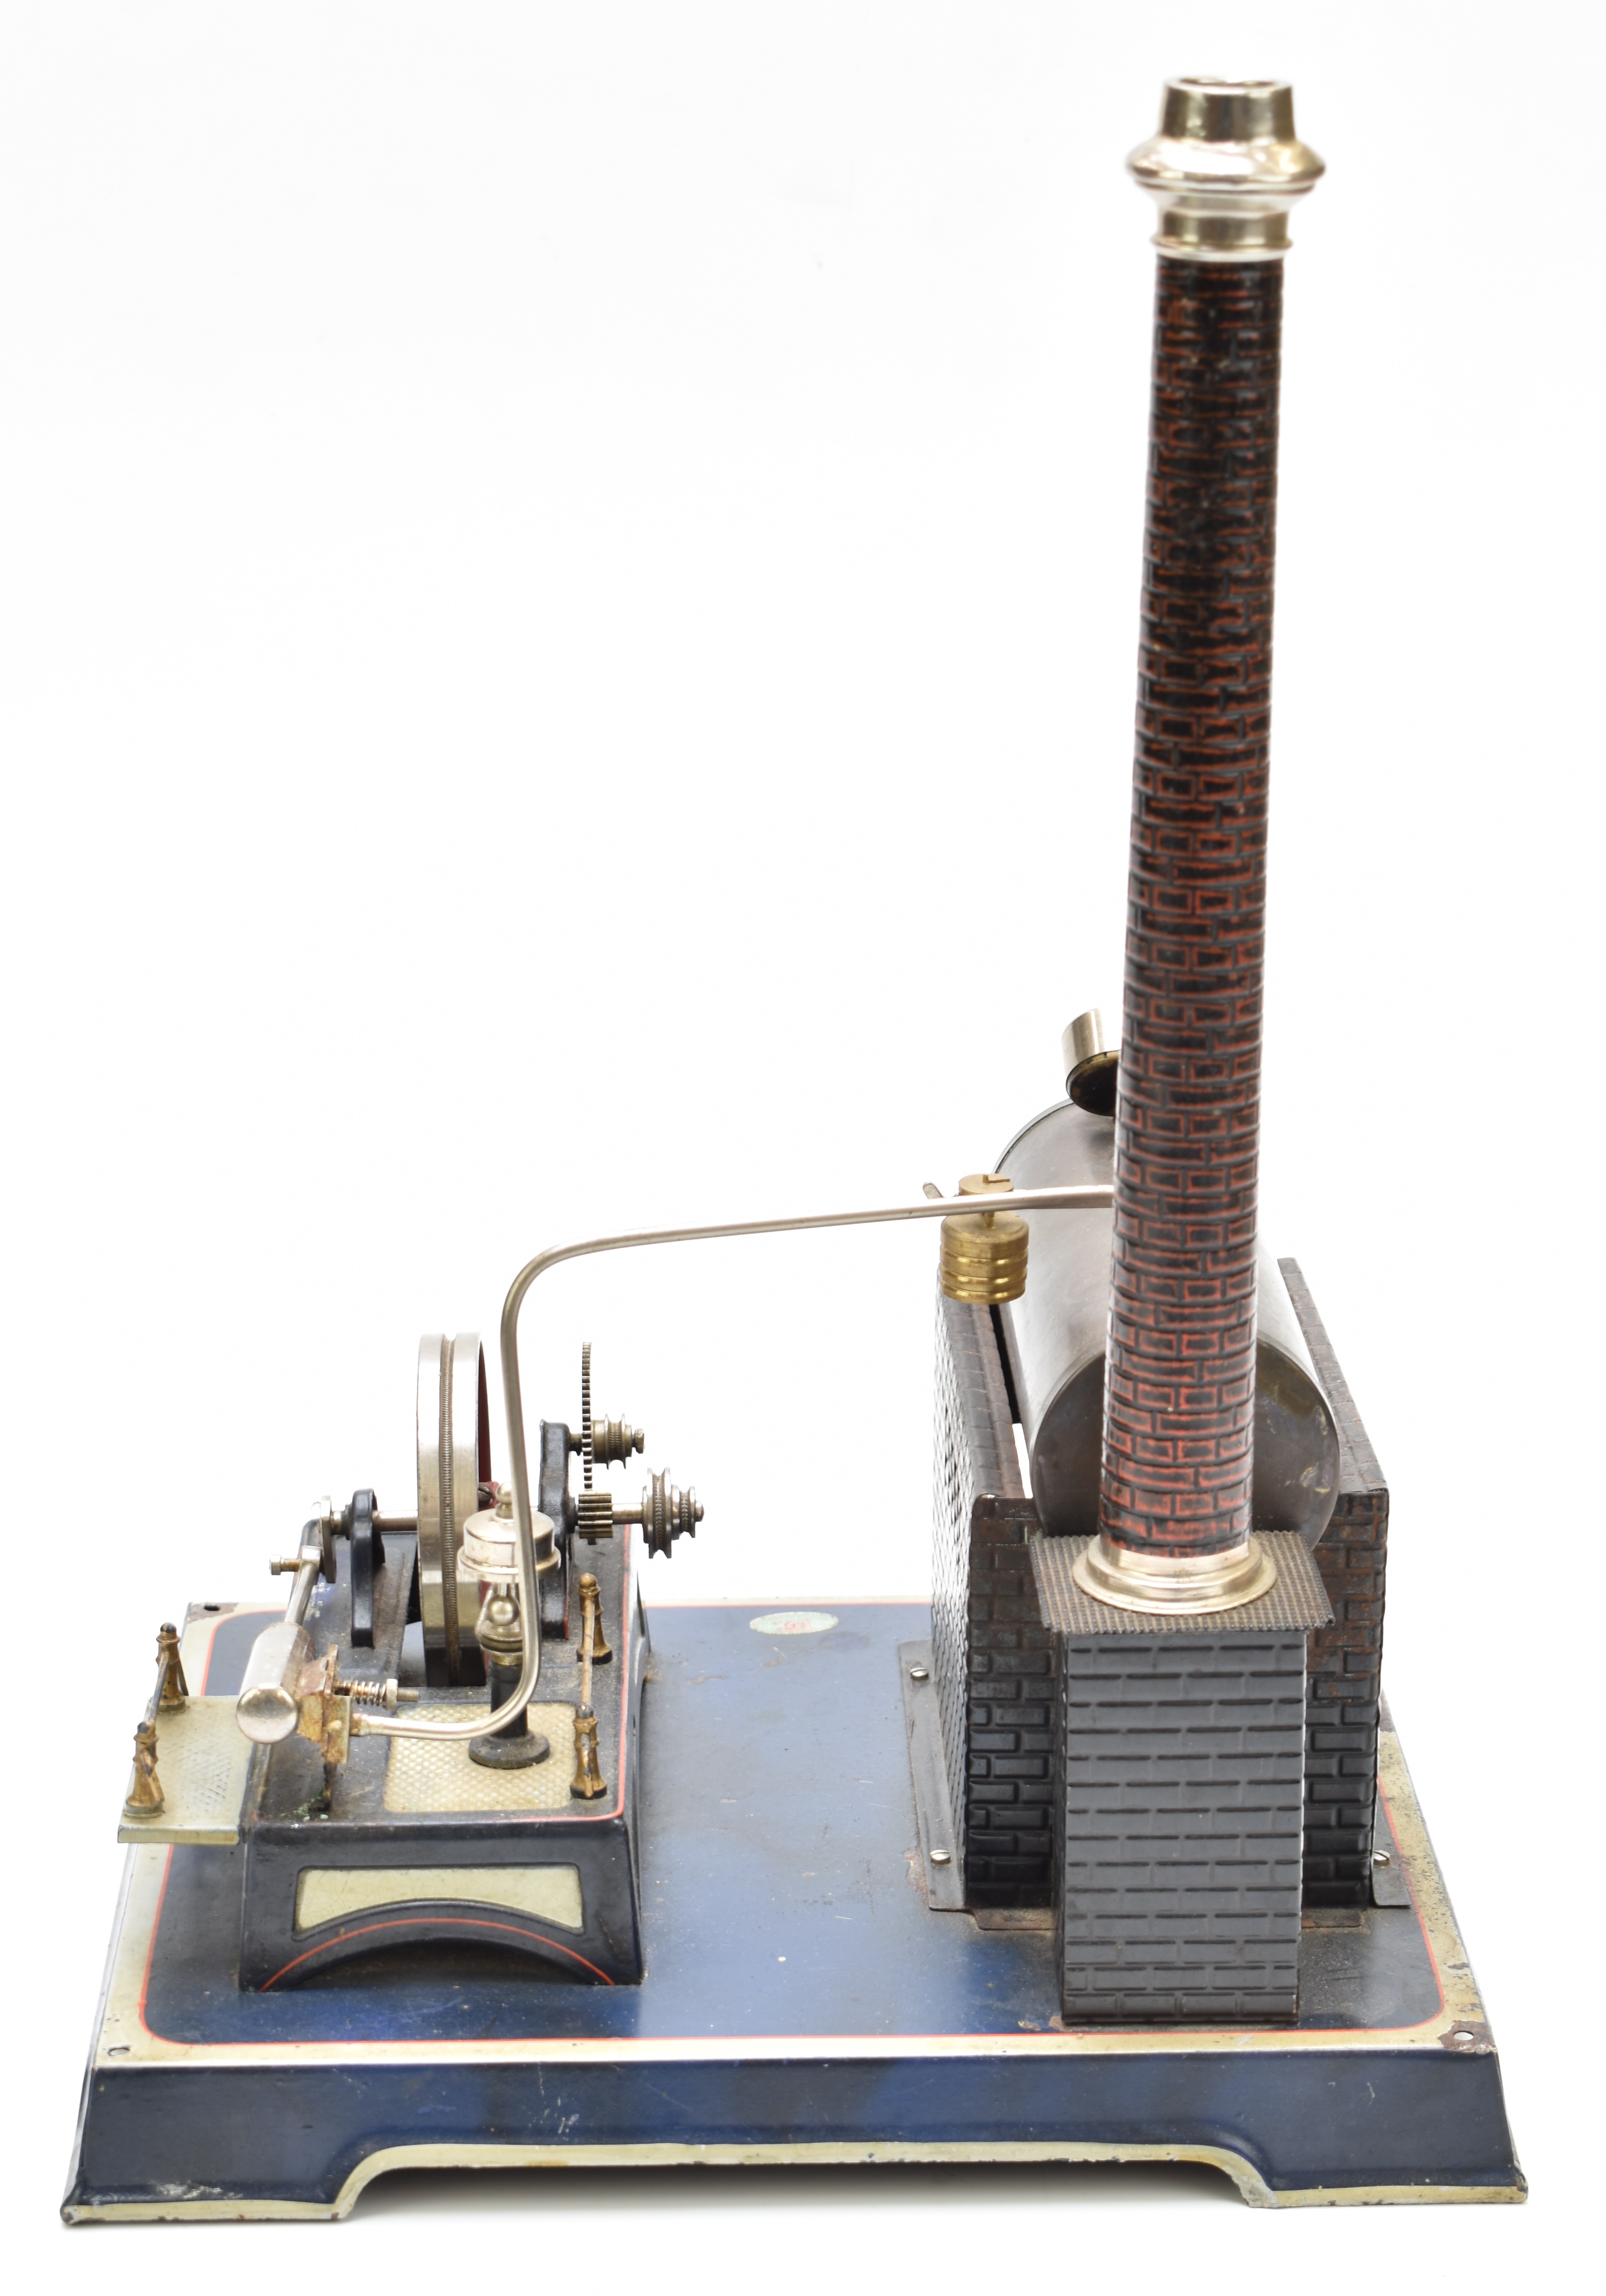 Doll and Cie stationary live steam engine, the boiler with faux brickwork base and chimney, the - Image 4 of 6